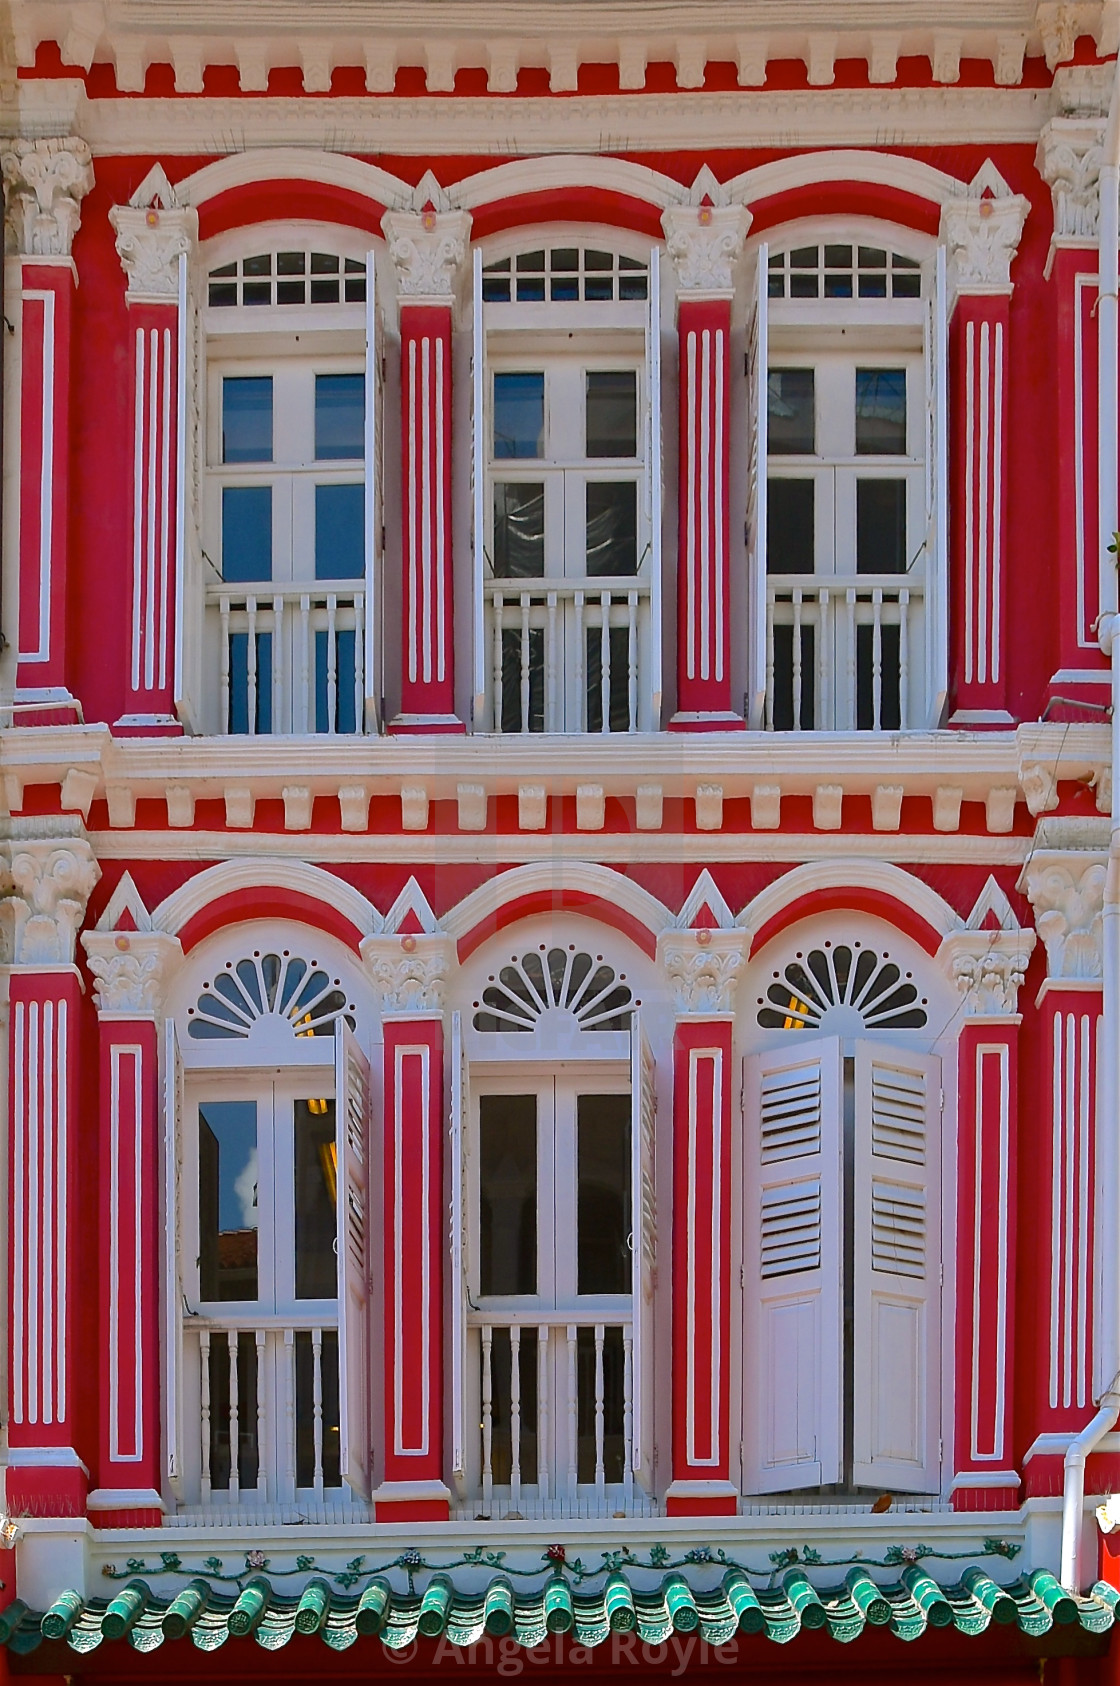 "Red peranakan house with white windows" stock image